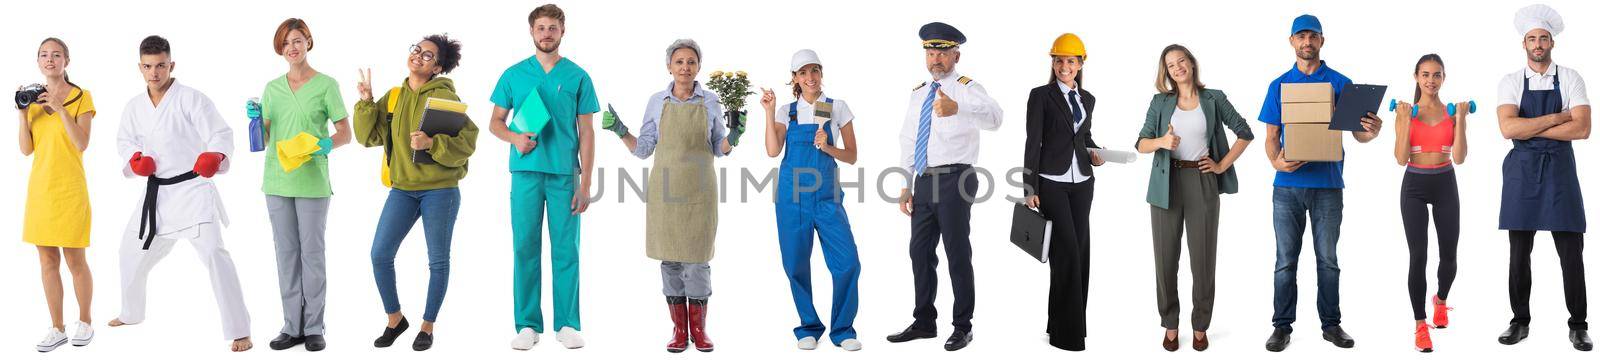 Full length portraits of group of people of diverse different professions of business, medicine, construction industry on white